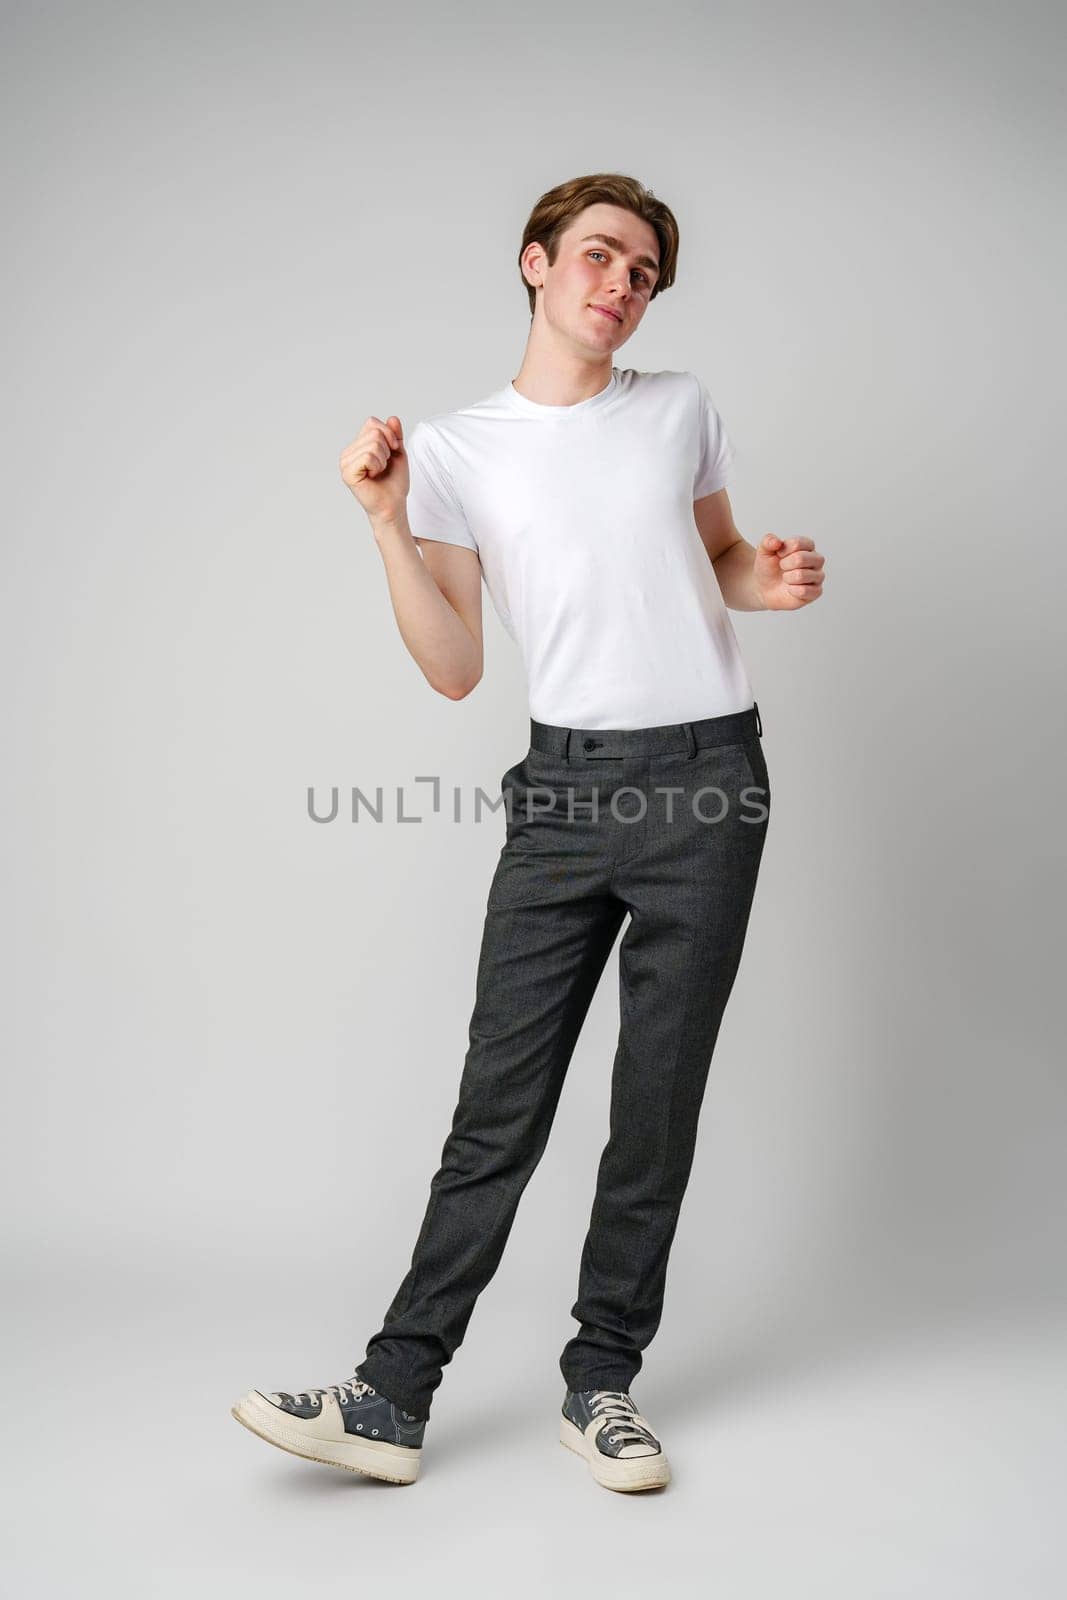 A slender young man with dark hair is captured mid-dance, his expression joyful. Wearing a clean white t-shirt paired with dark trousers and casual sneakers, he appears to be embracing the moment as he moves rhythmically against a solid gray background.